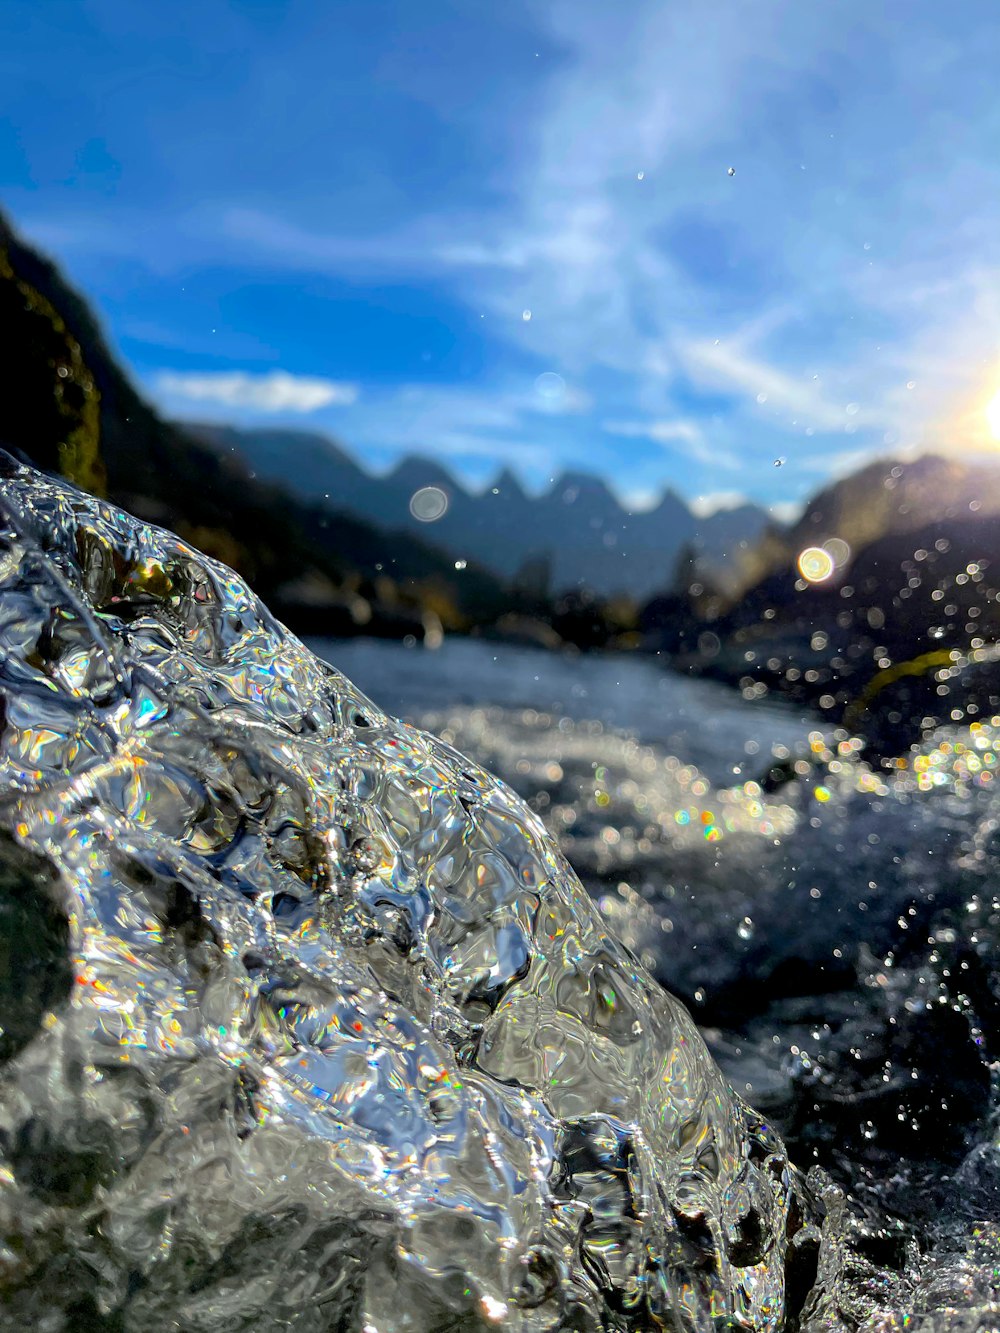 water droplets on rock during daytime